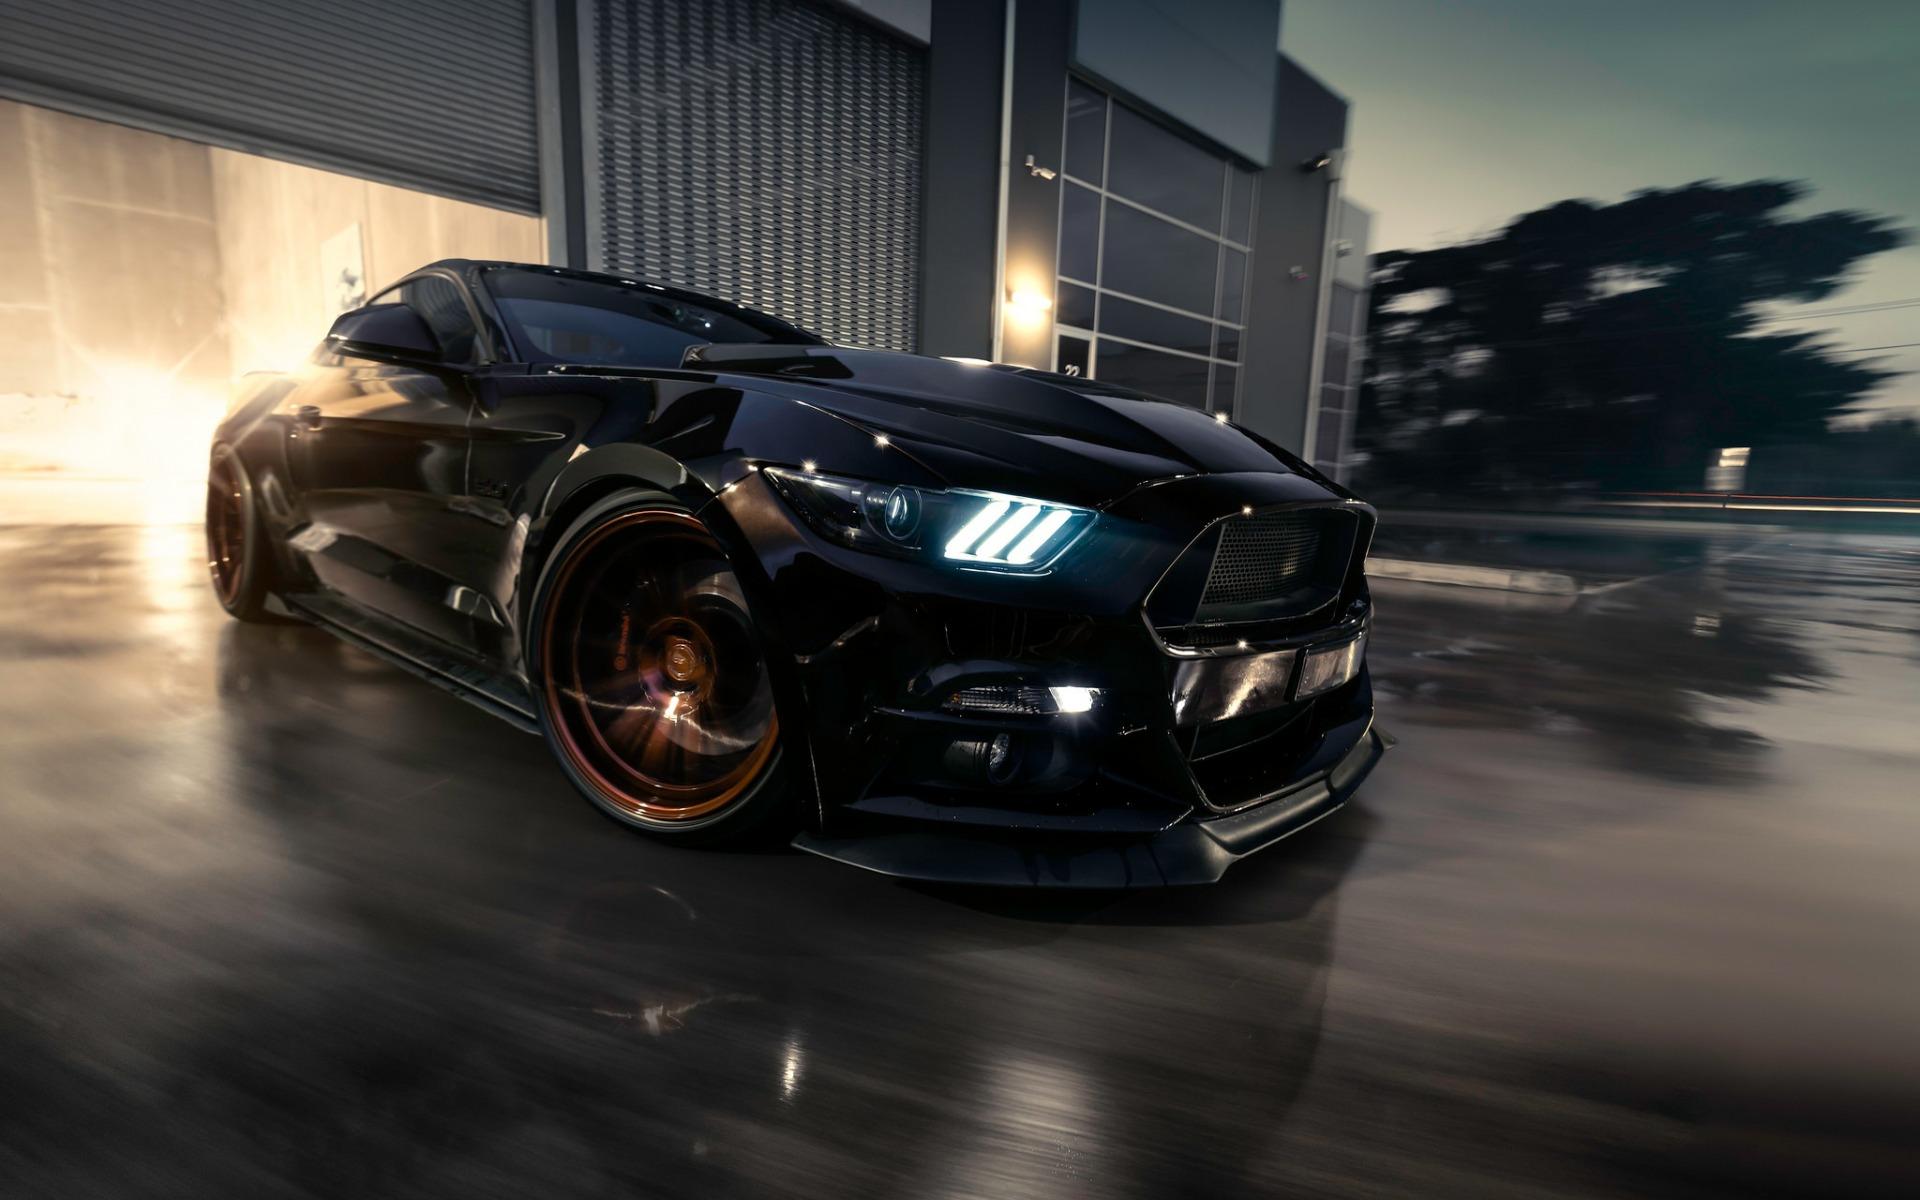 Download wallpaper Ford Mustang, black sports coupe, tuning Mustang